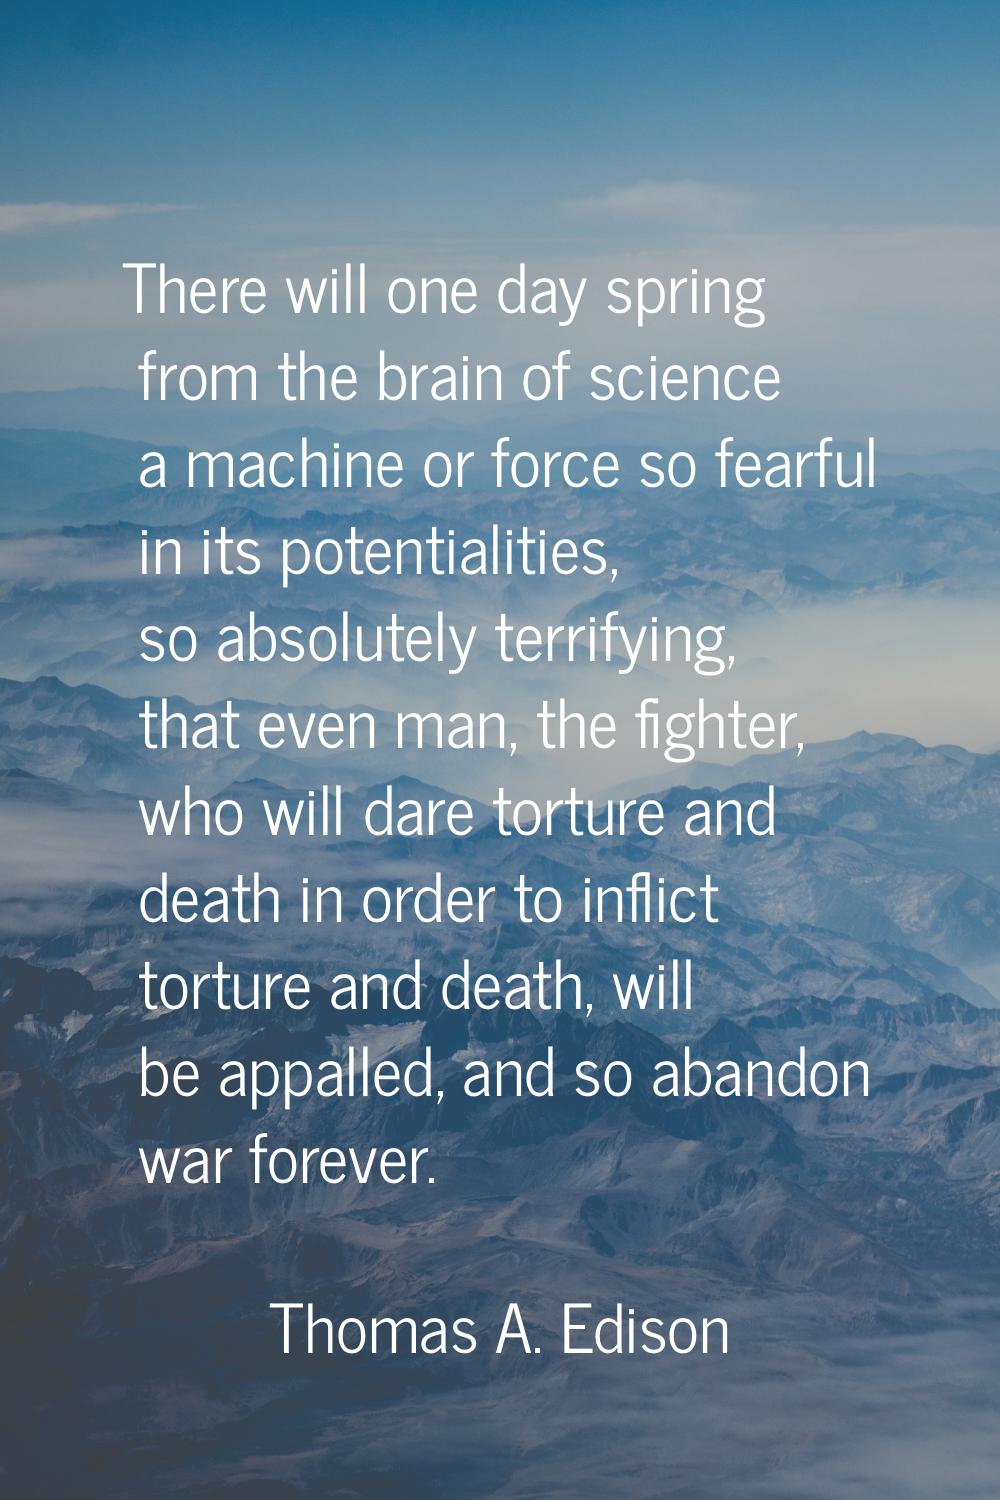 There will one day spring from the brain of science a machine or force so fearful in its potentiali